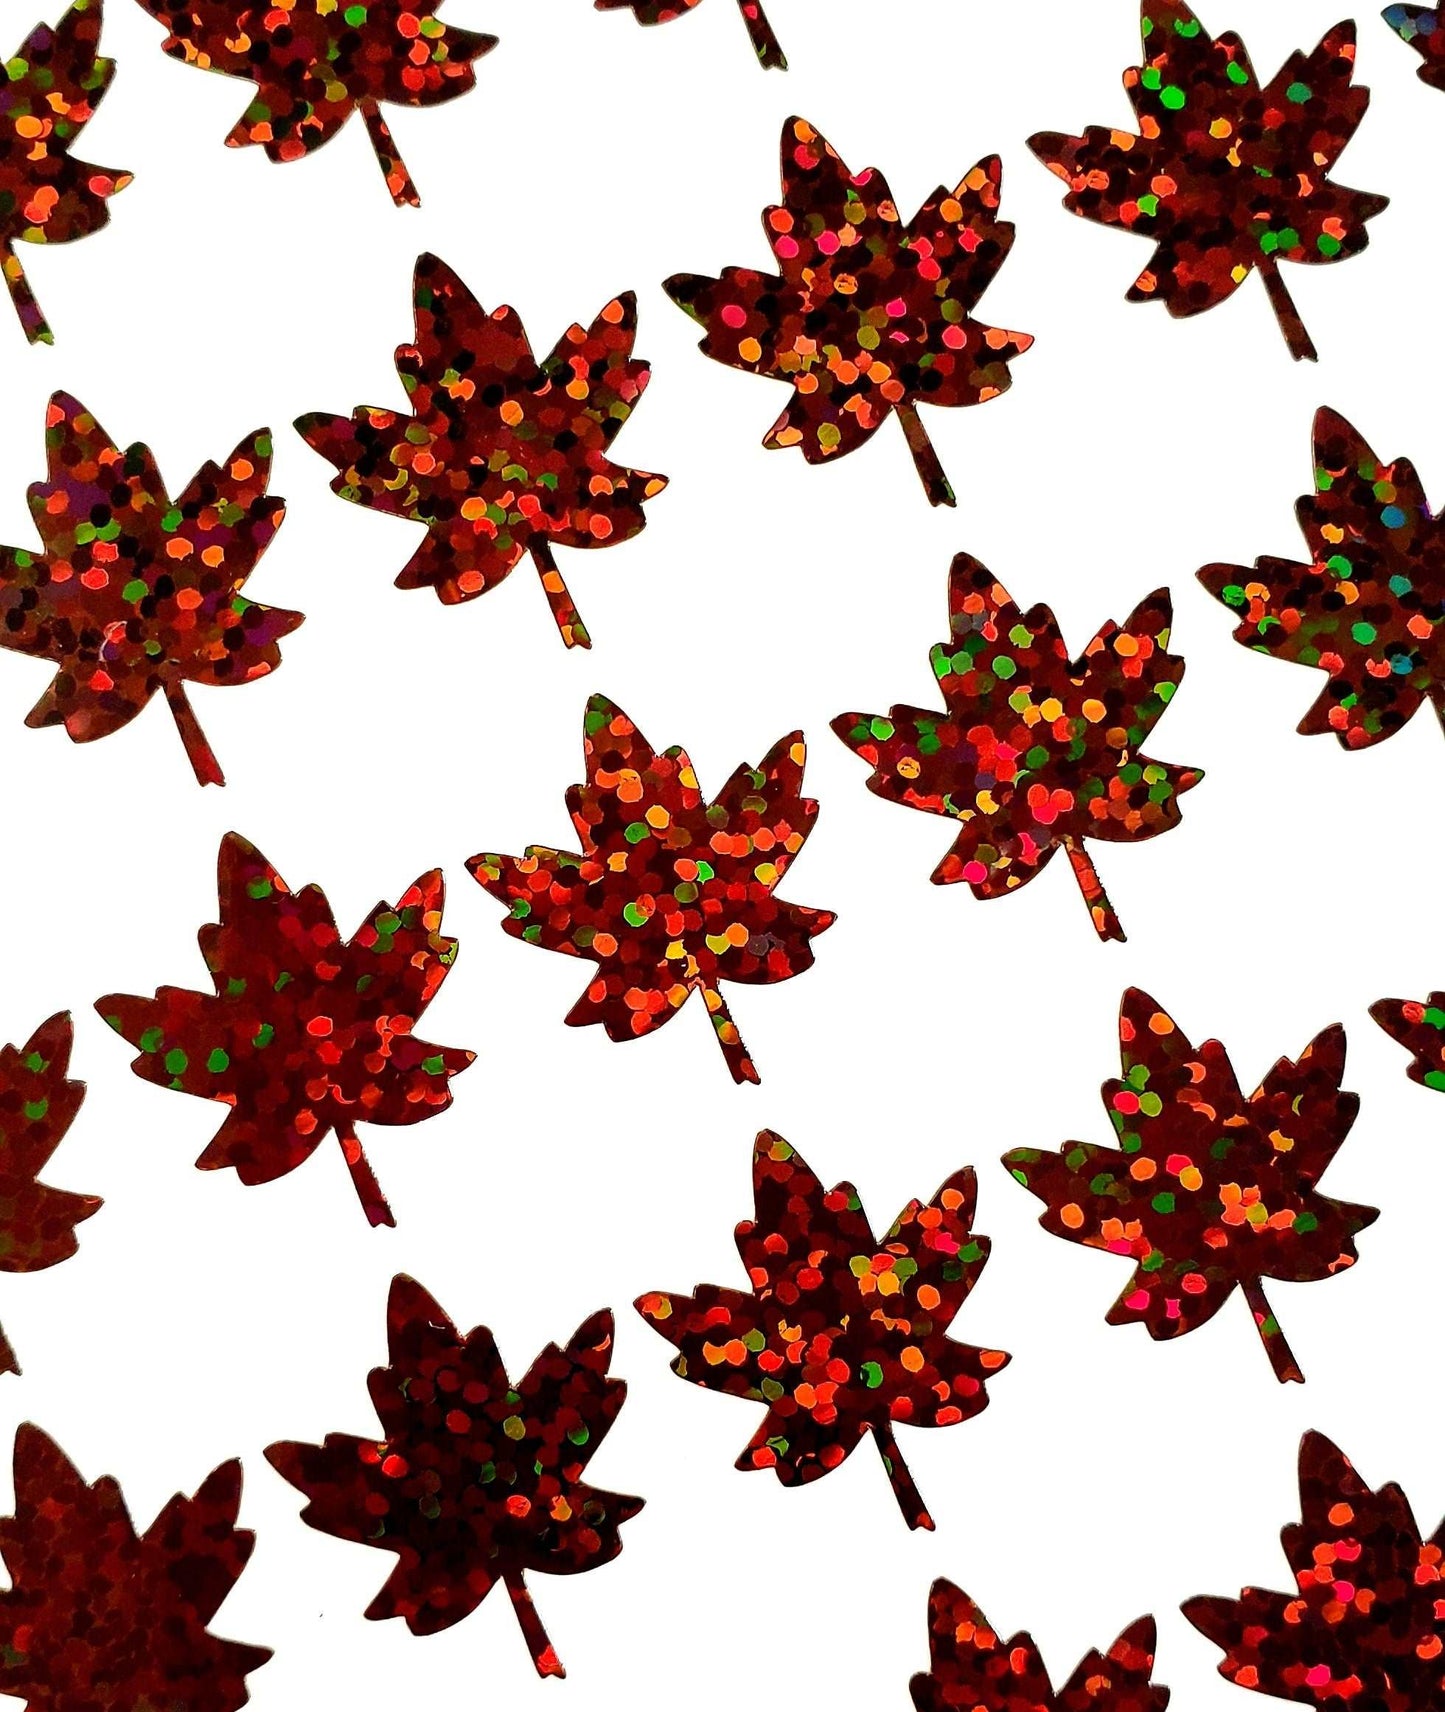 Brown Maple Leaves Sticker Sheet, set of 45 leaf vinyl decals for Autumn weddings, fall decor, planners, scrapbook pages and Thanksgiving.